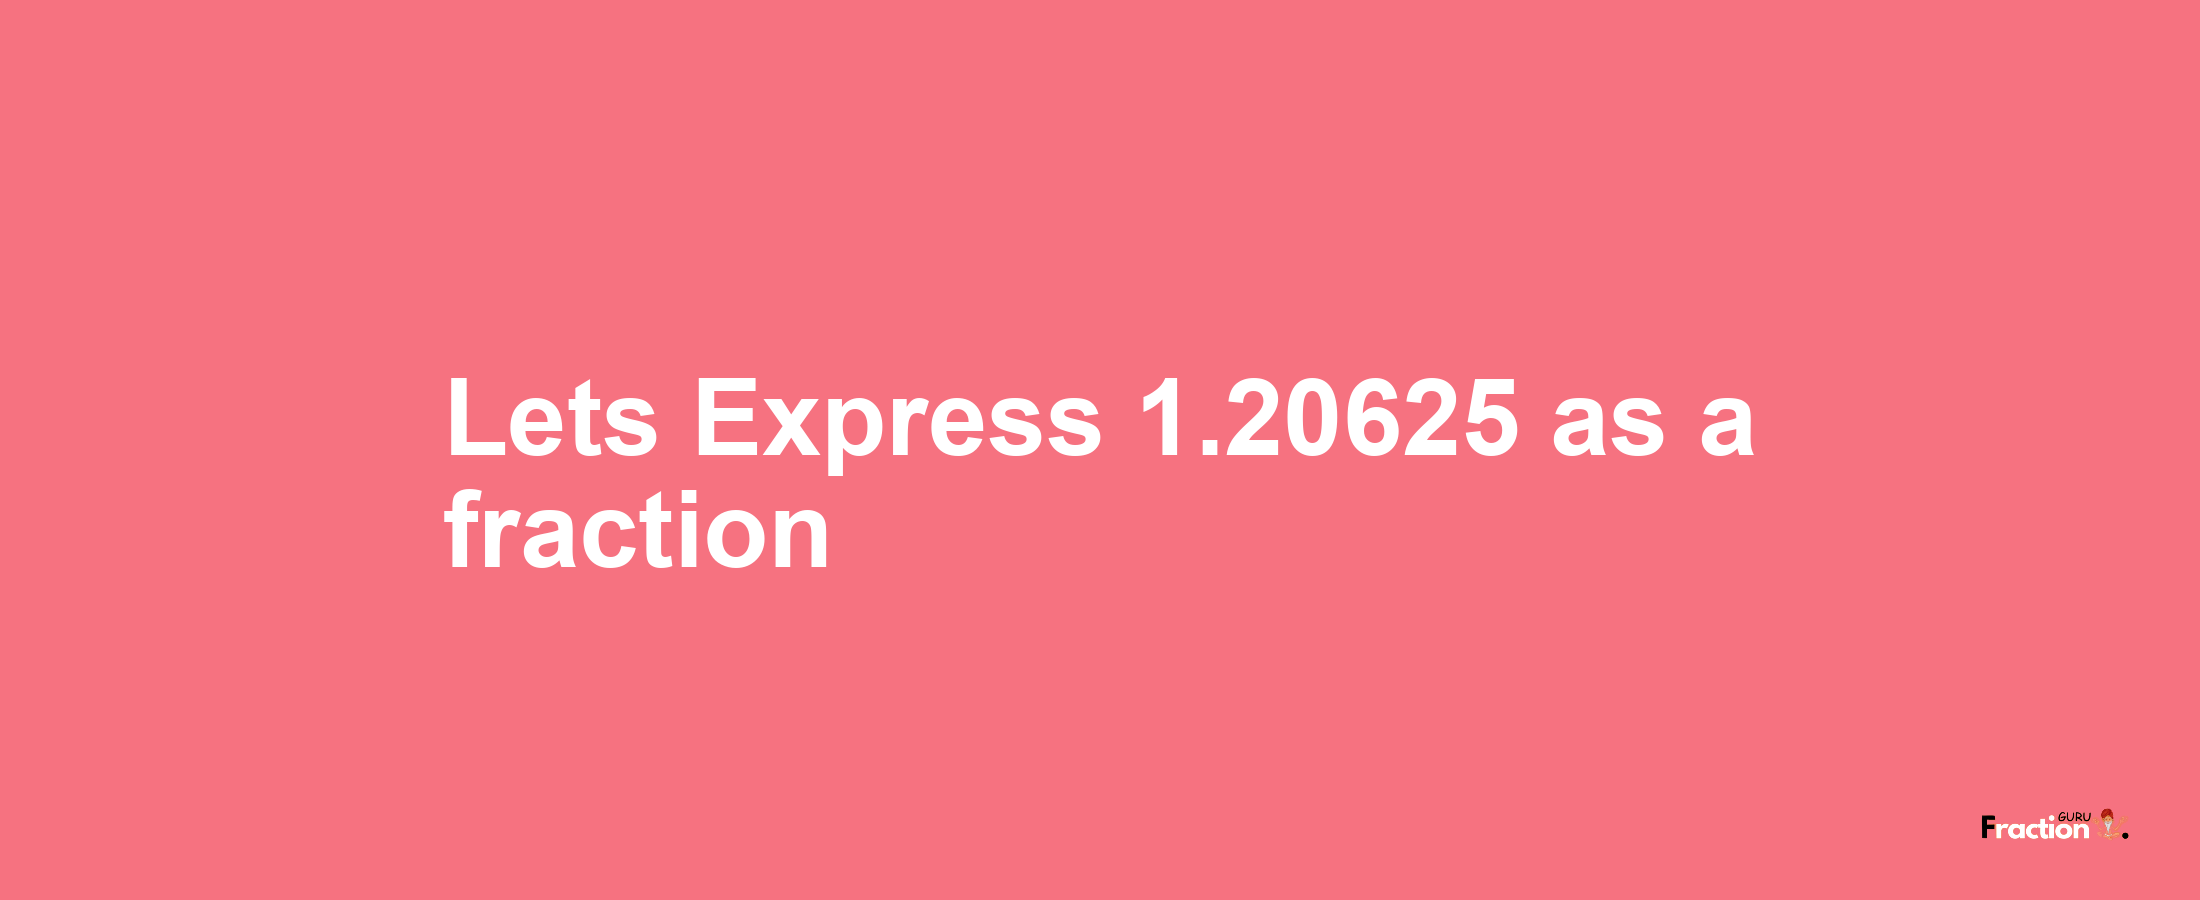 Lets Express 1.20625 as afraction